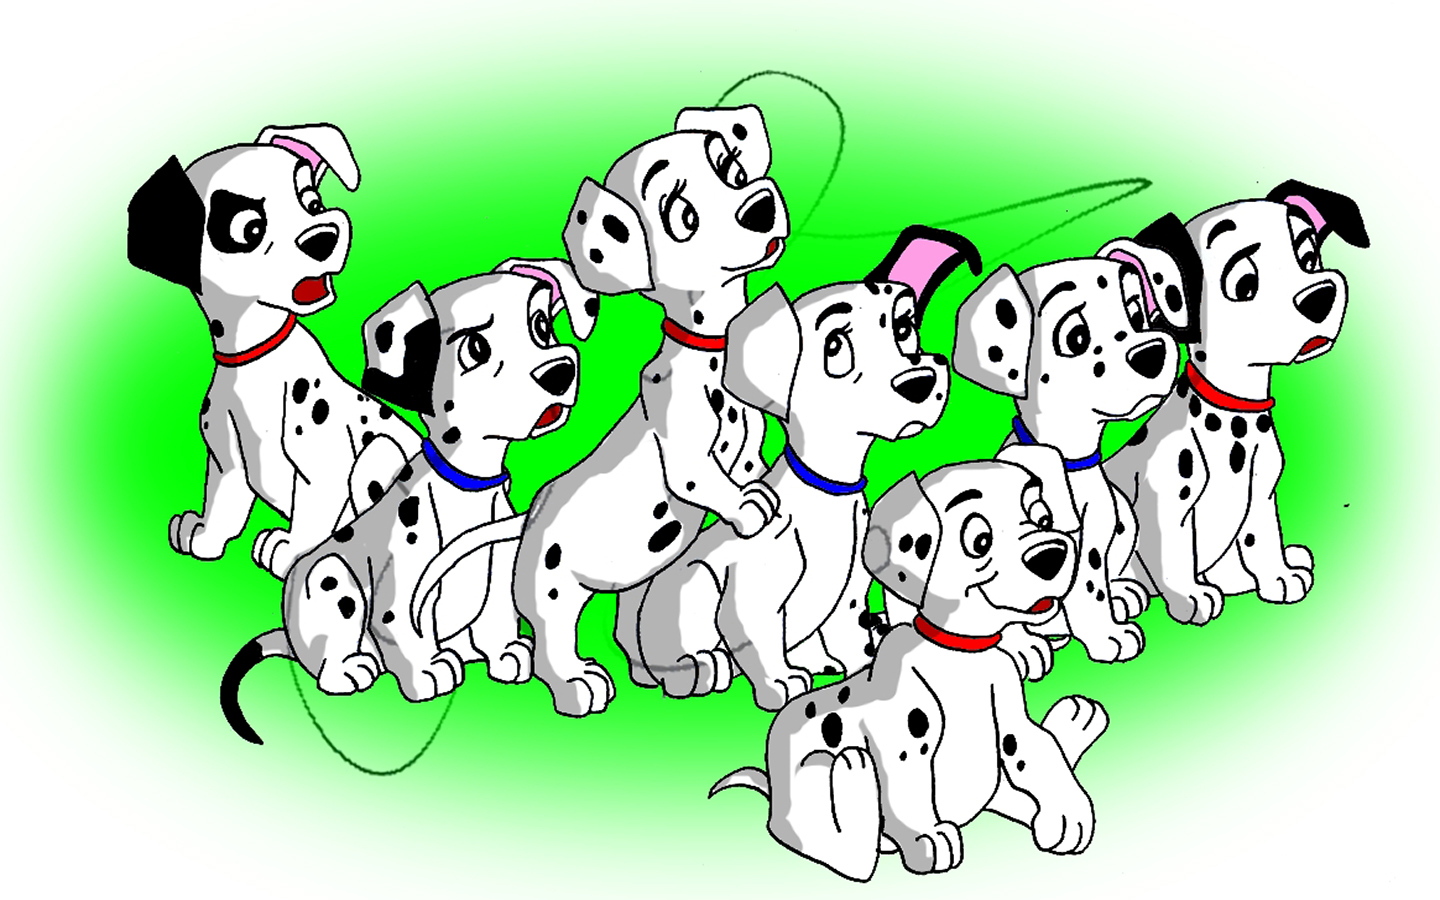 Clip Arts Related To : 101 dalmatians clipart free.